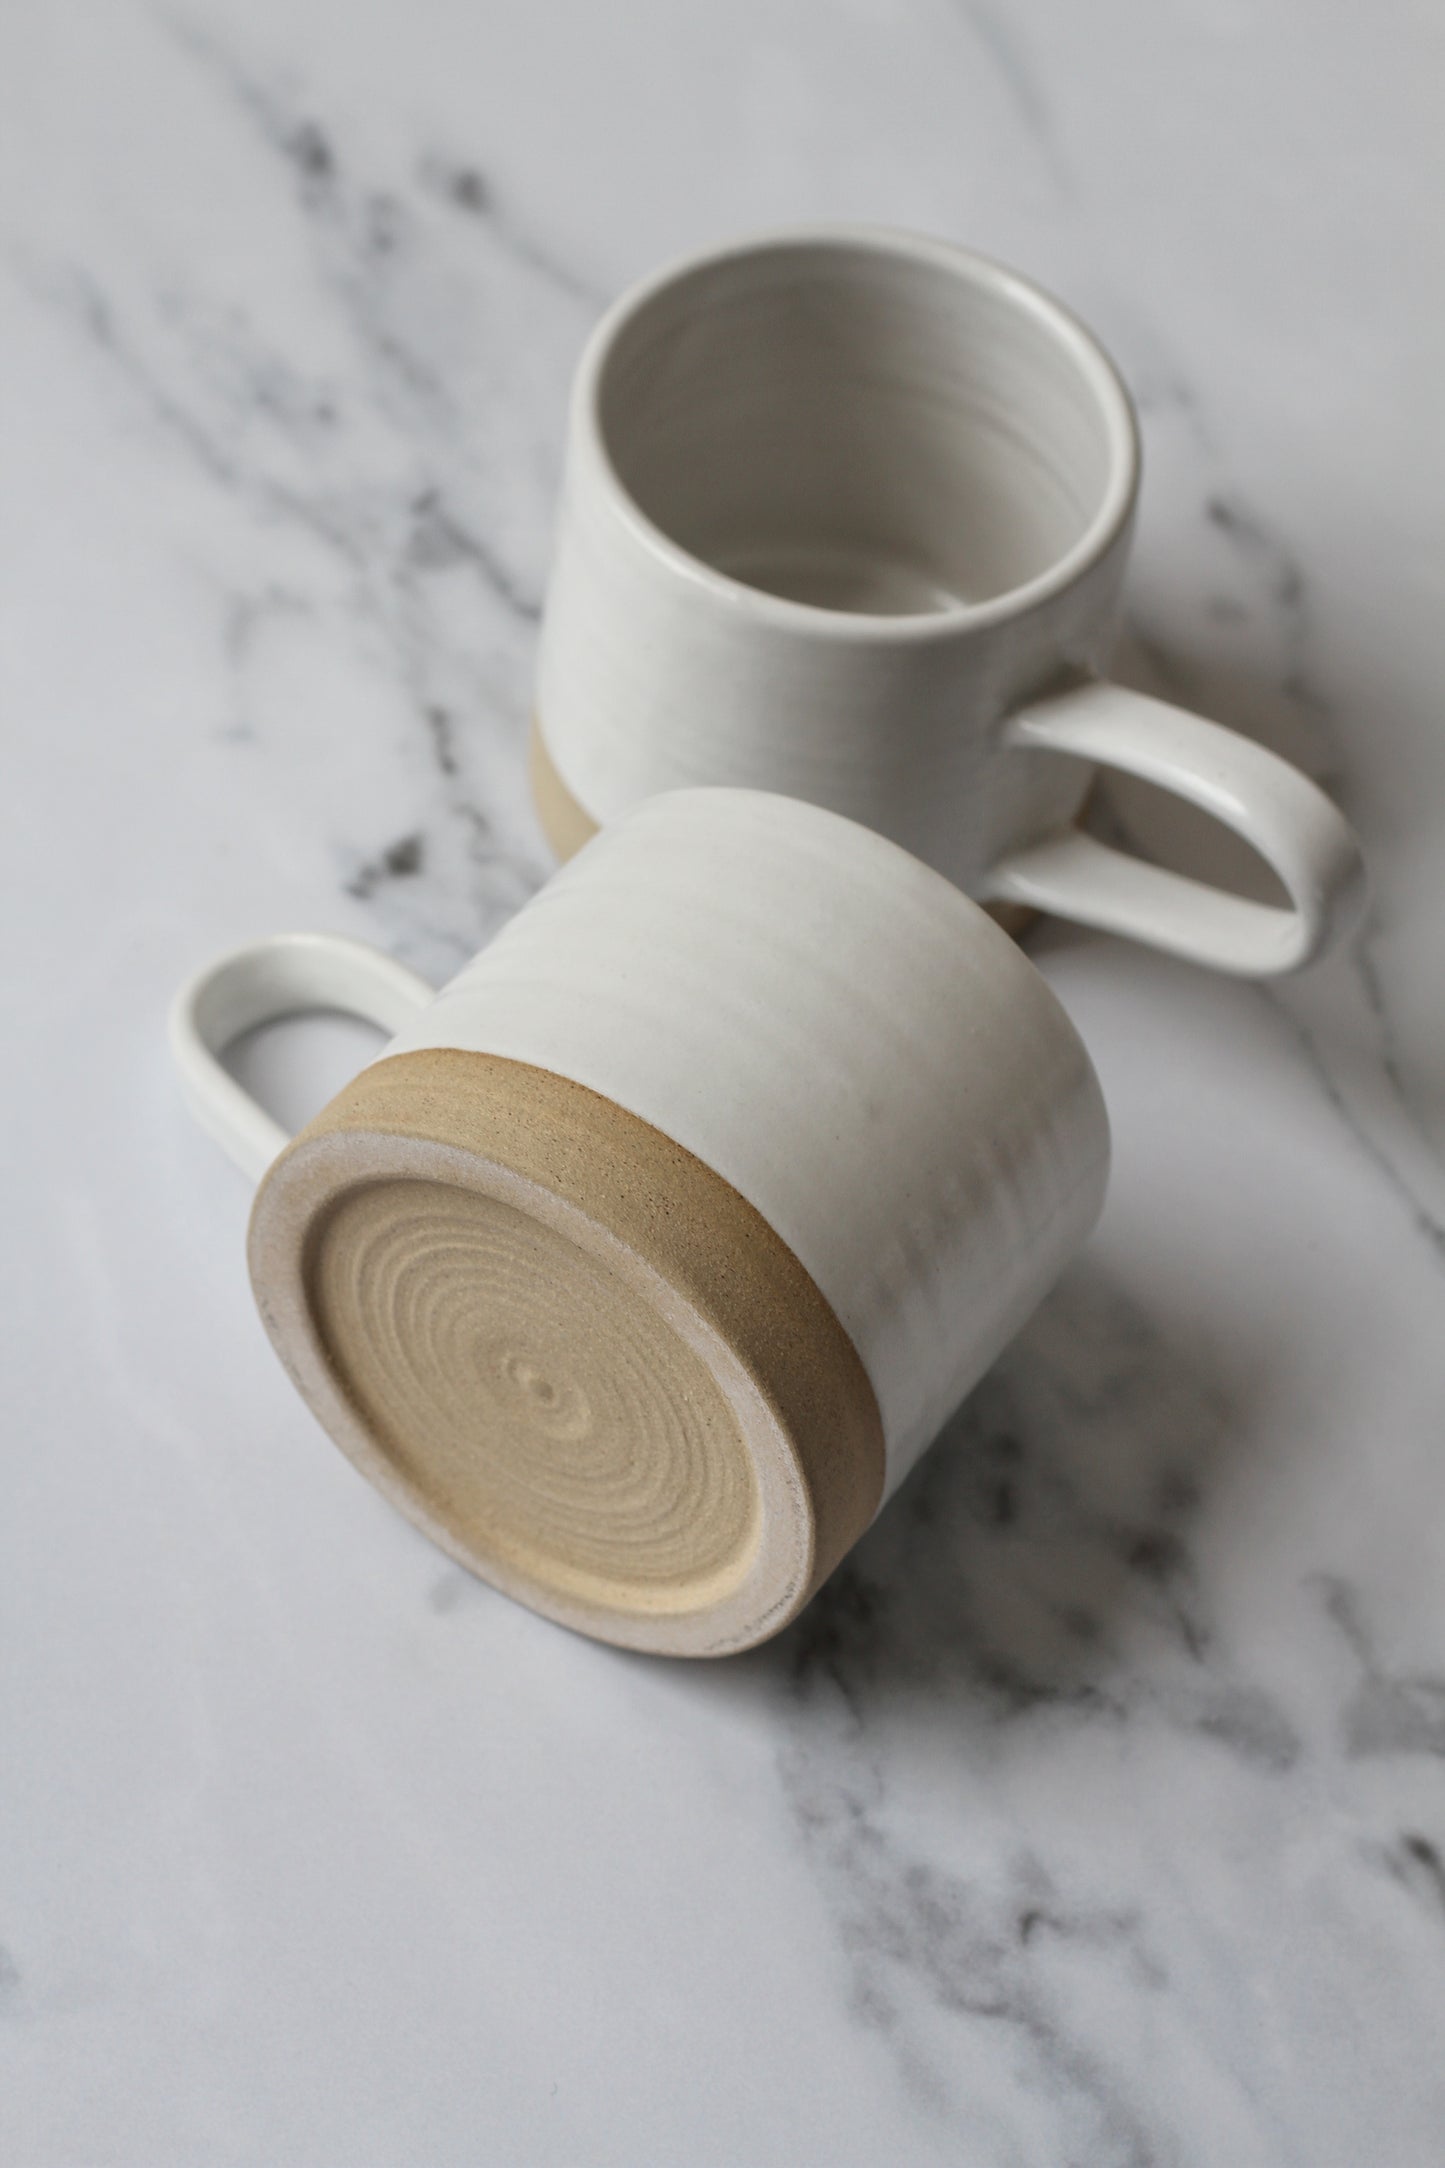 handmade stoneware mug with white glaze made in York, England by potter Philip Magson